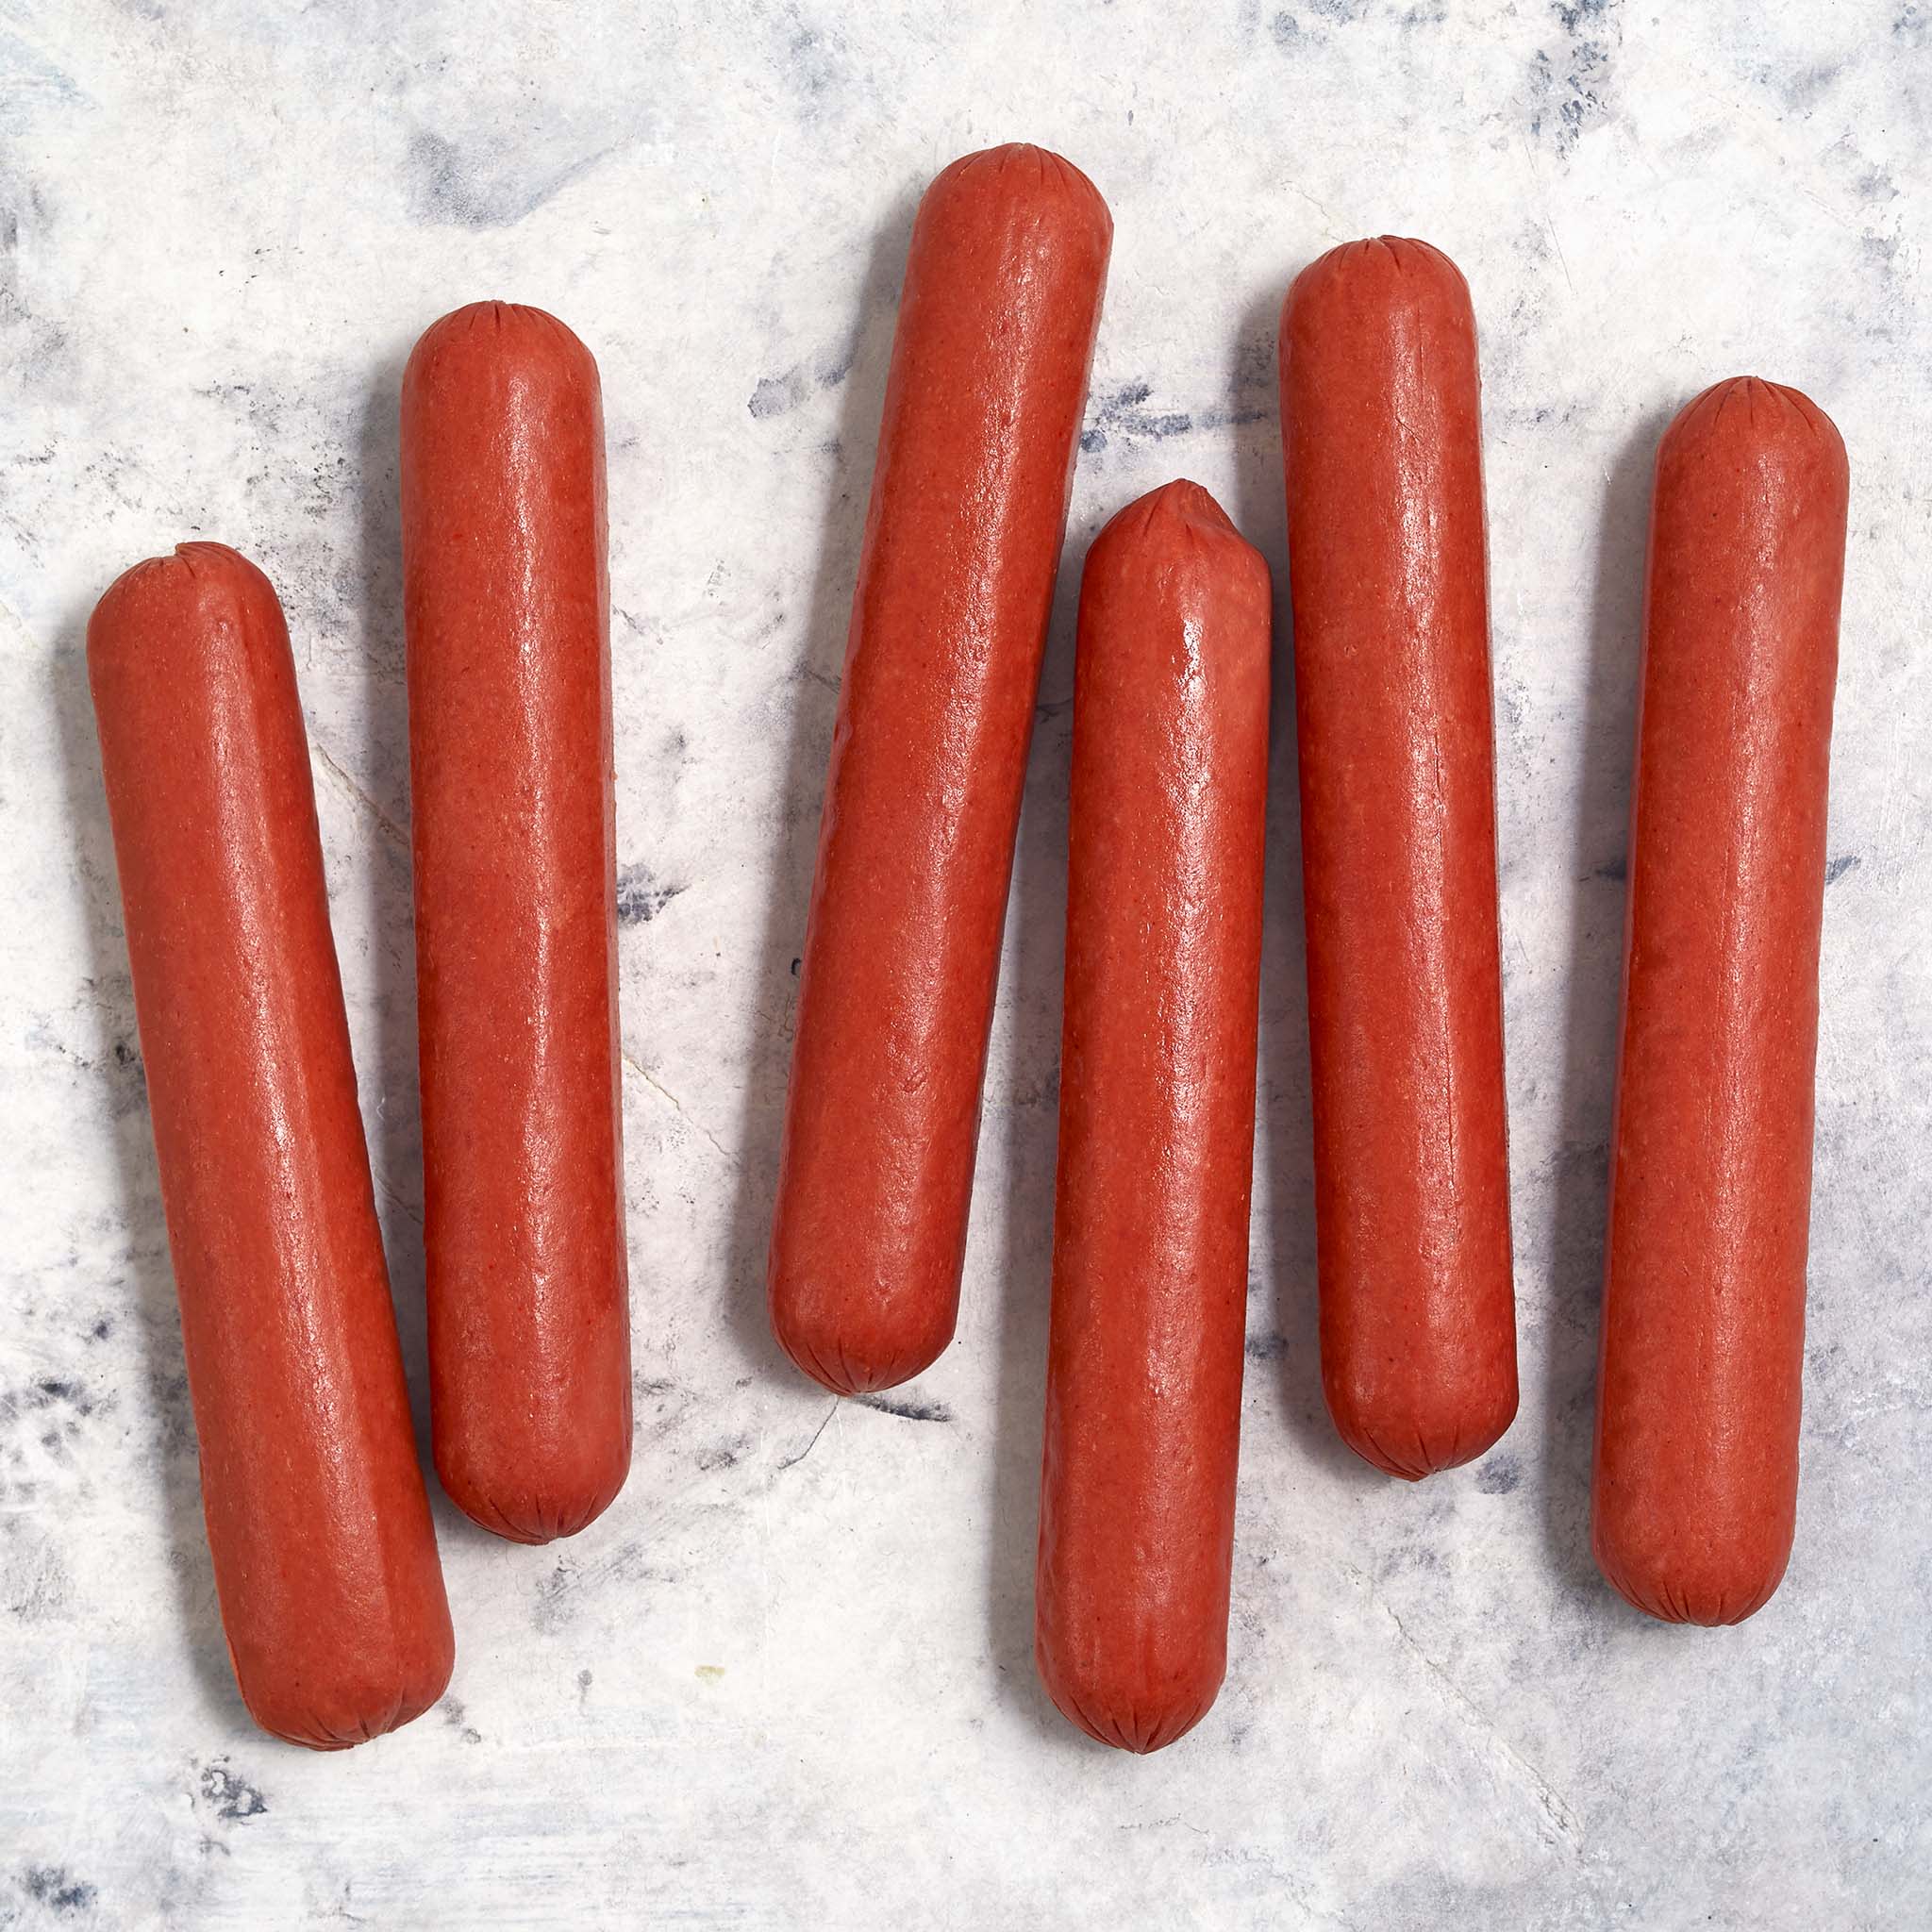 3702 WF Raw Fully Cooked Beef Classic Hot Dogs Beef